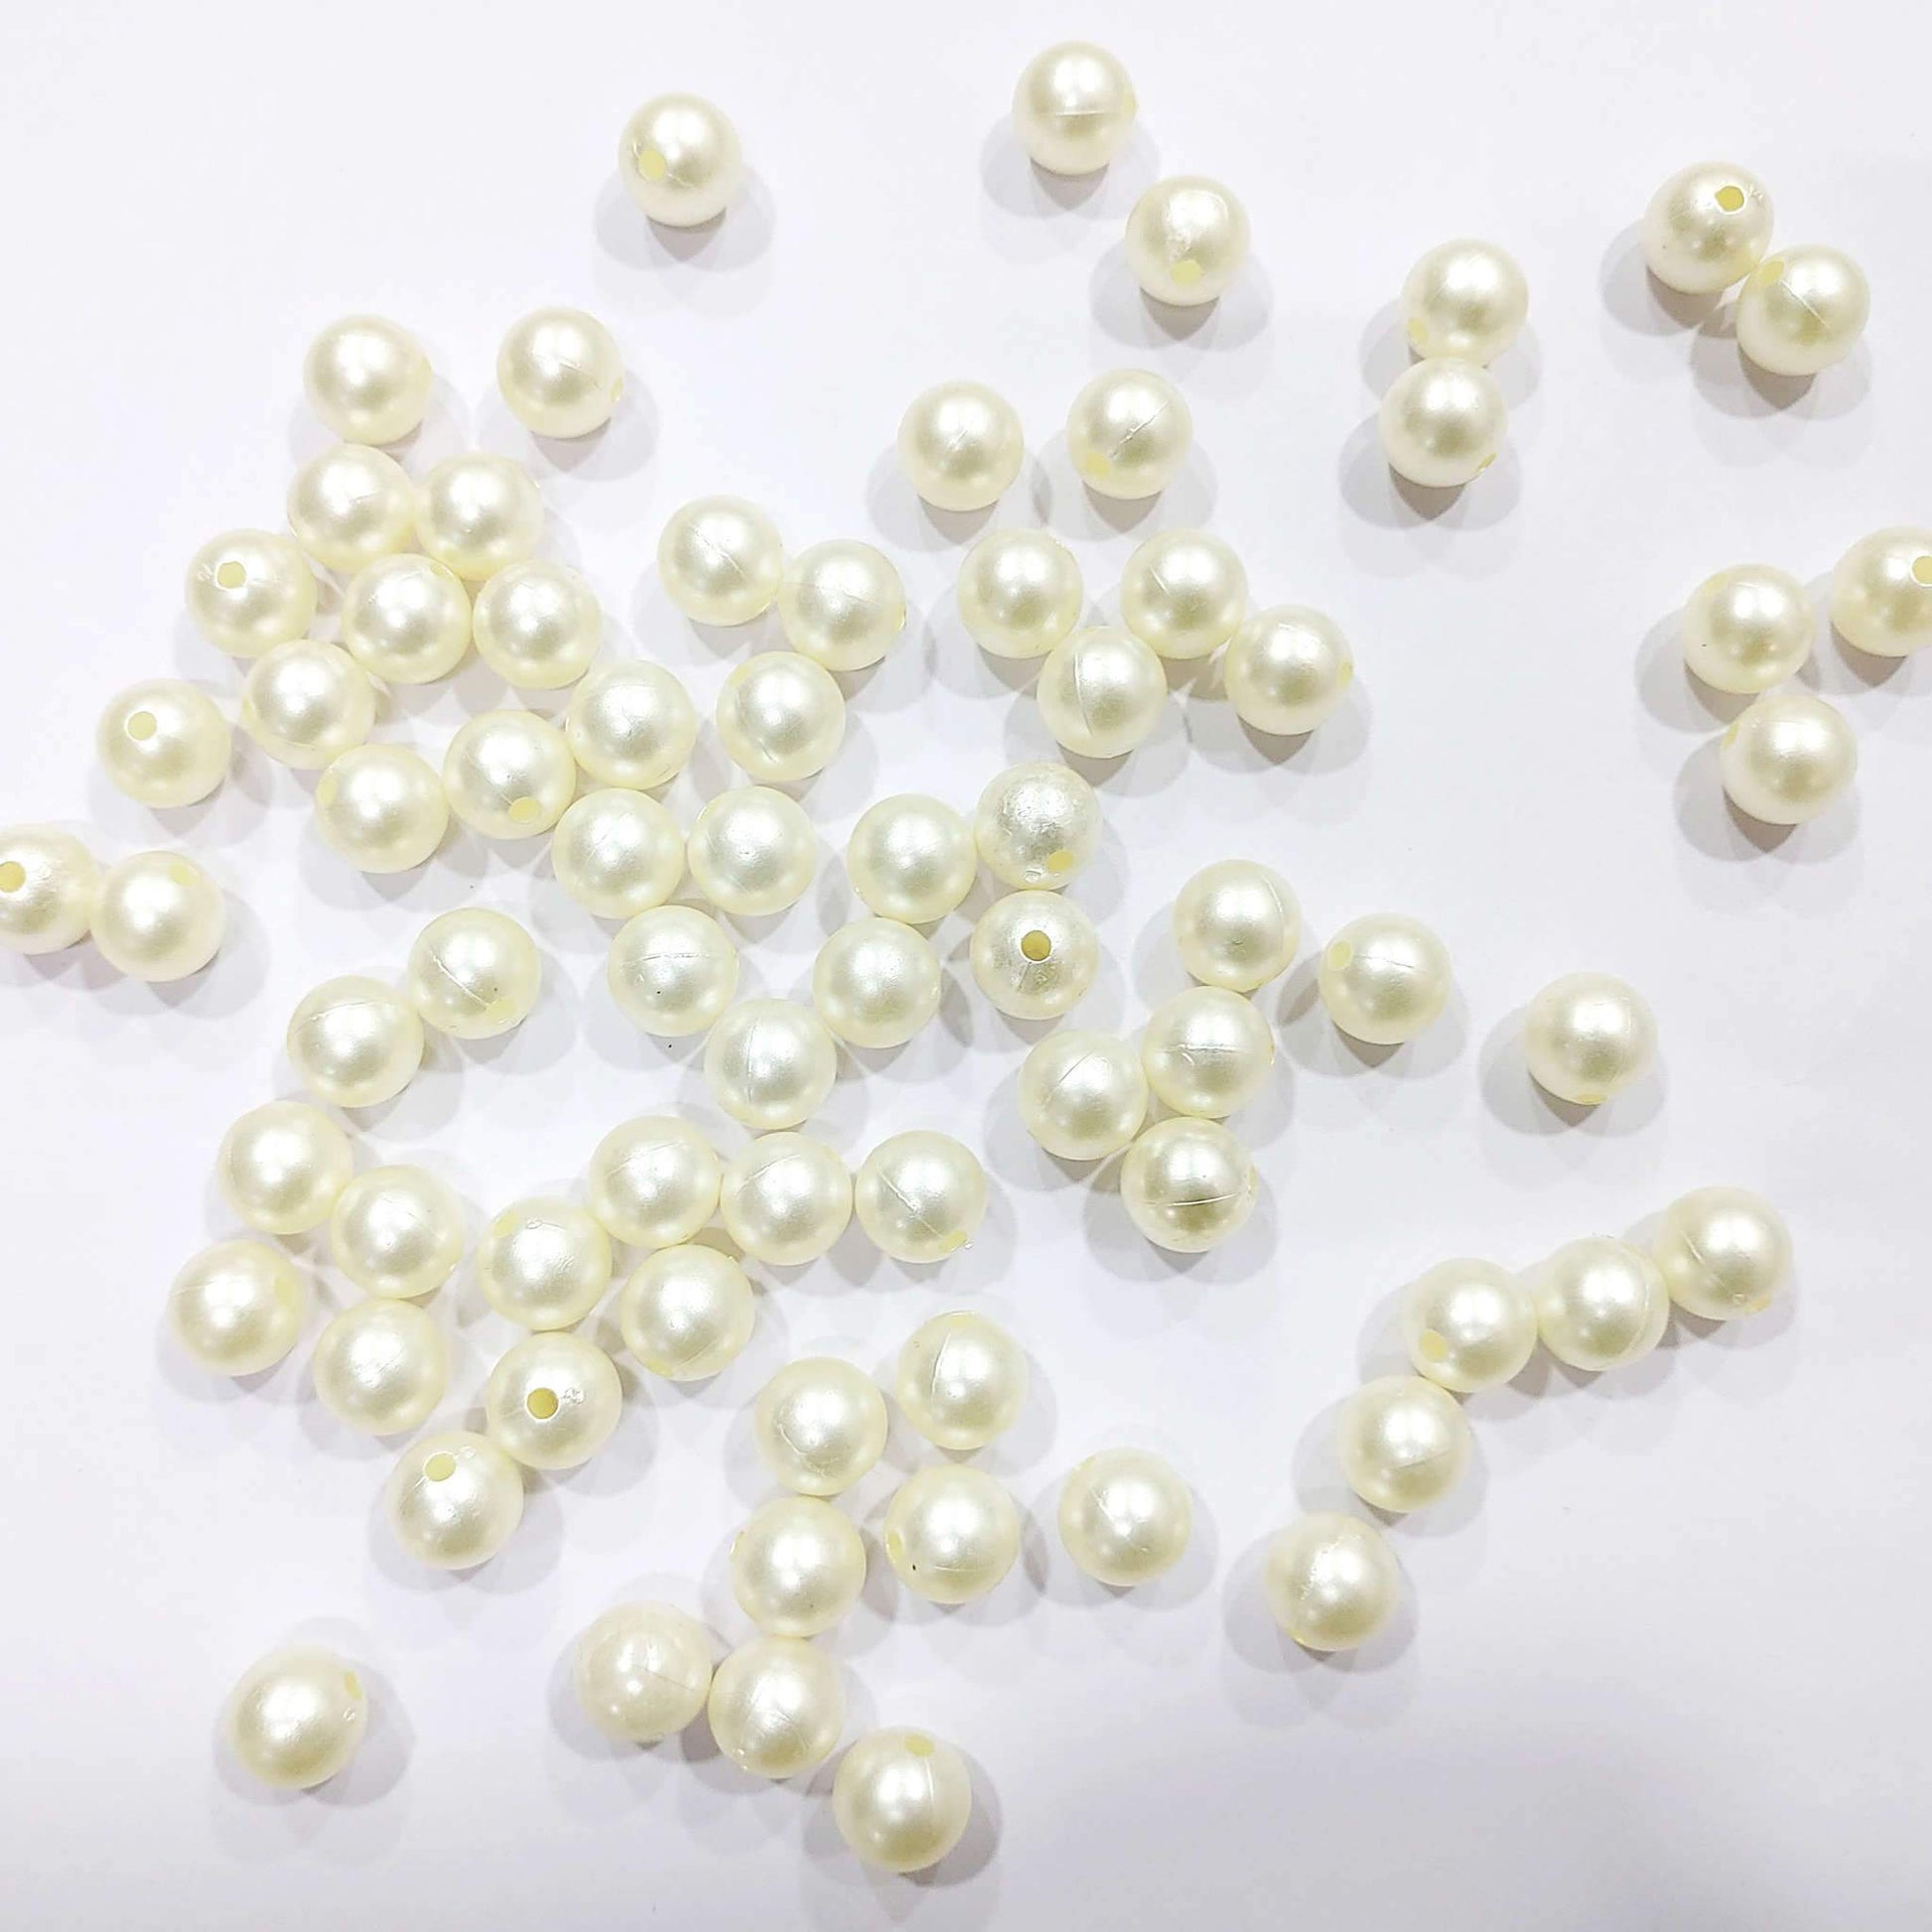 Indian Petals Premium quality round Pearl Beads for DIY Craft, Trousseau Packing or Decoration - Design 601